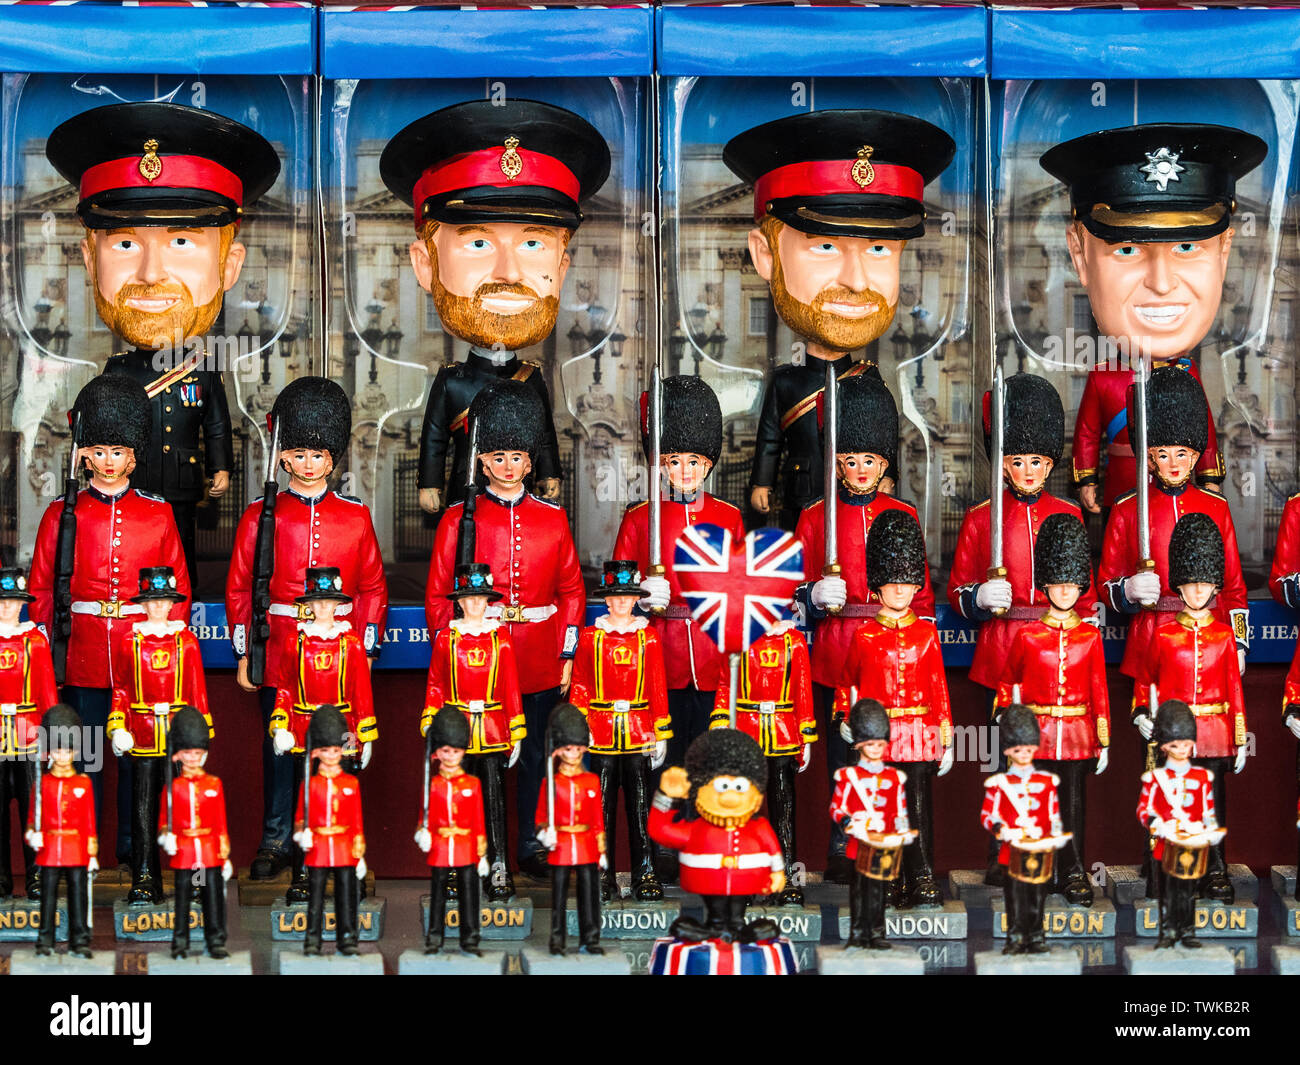 Prince Harry & Prince William models. The Royal Family - Prince William and Prince Harry toys and souvenirs for sale in a London Souvenir Shop Stock Photo